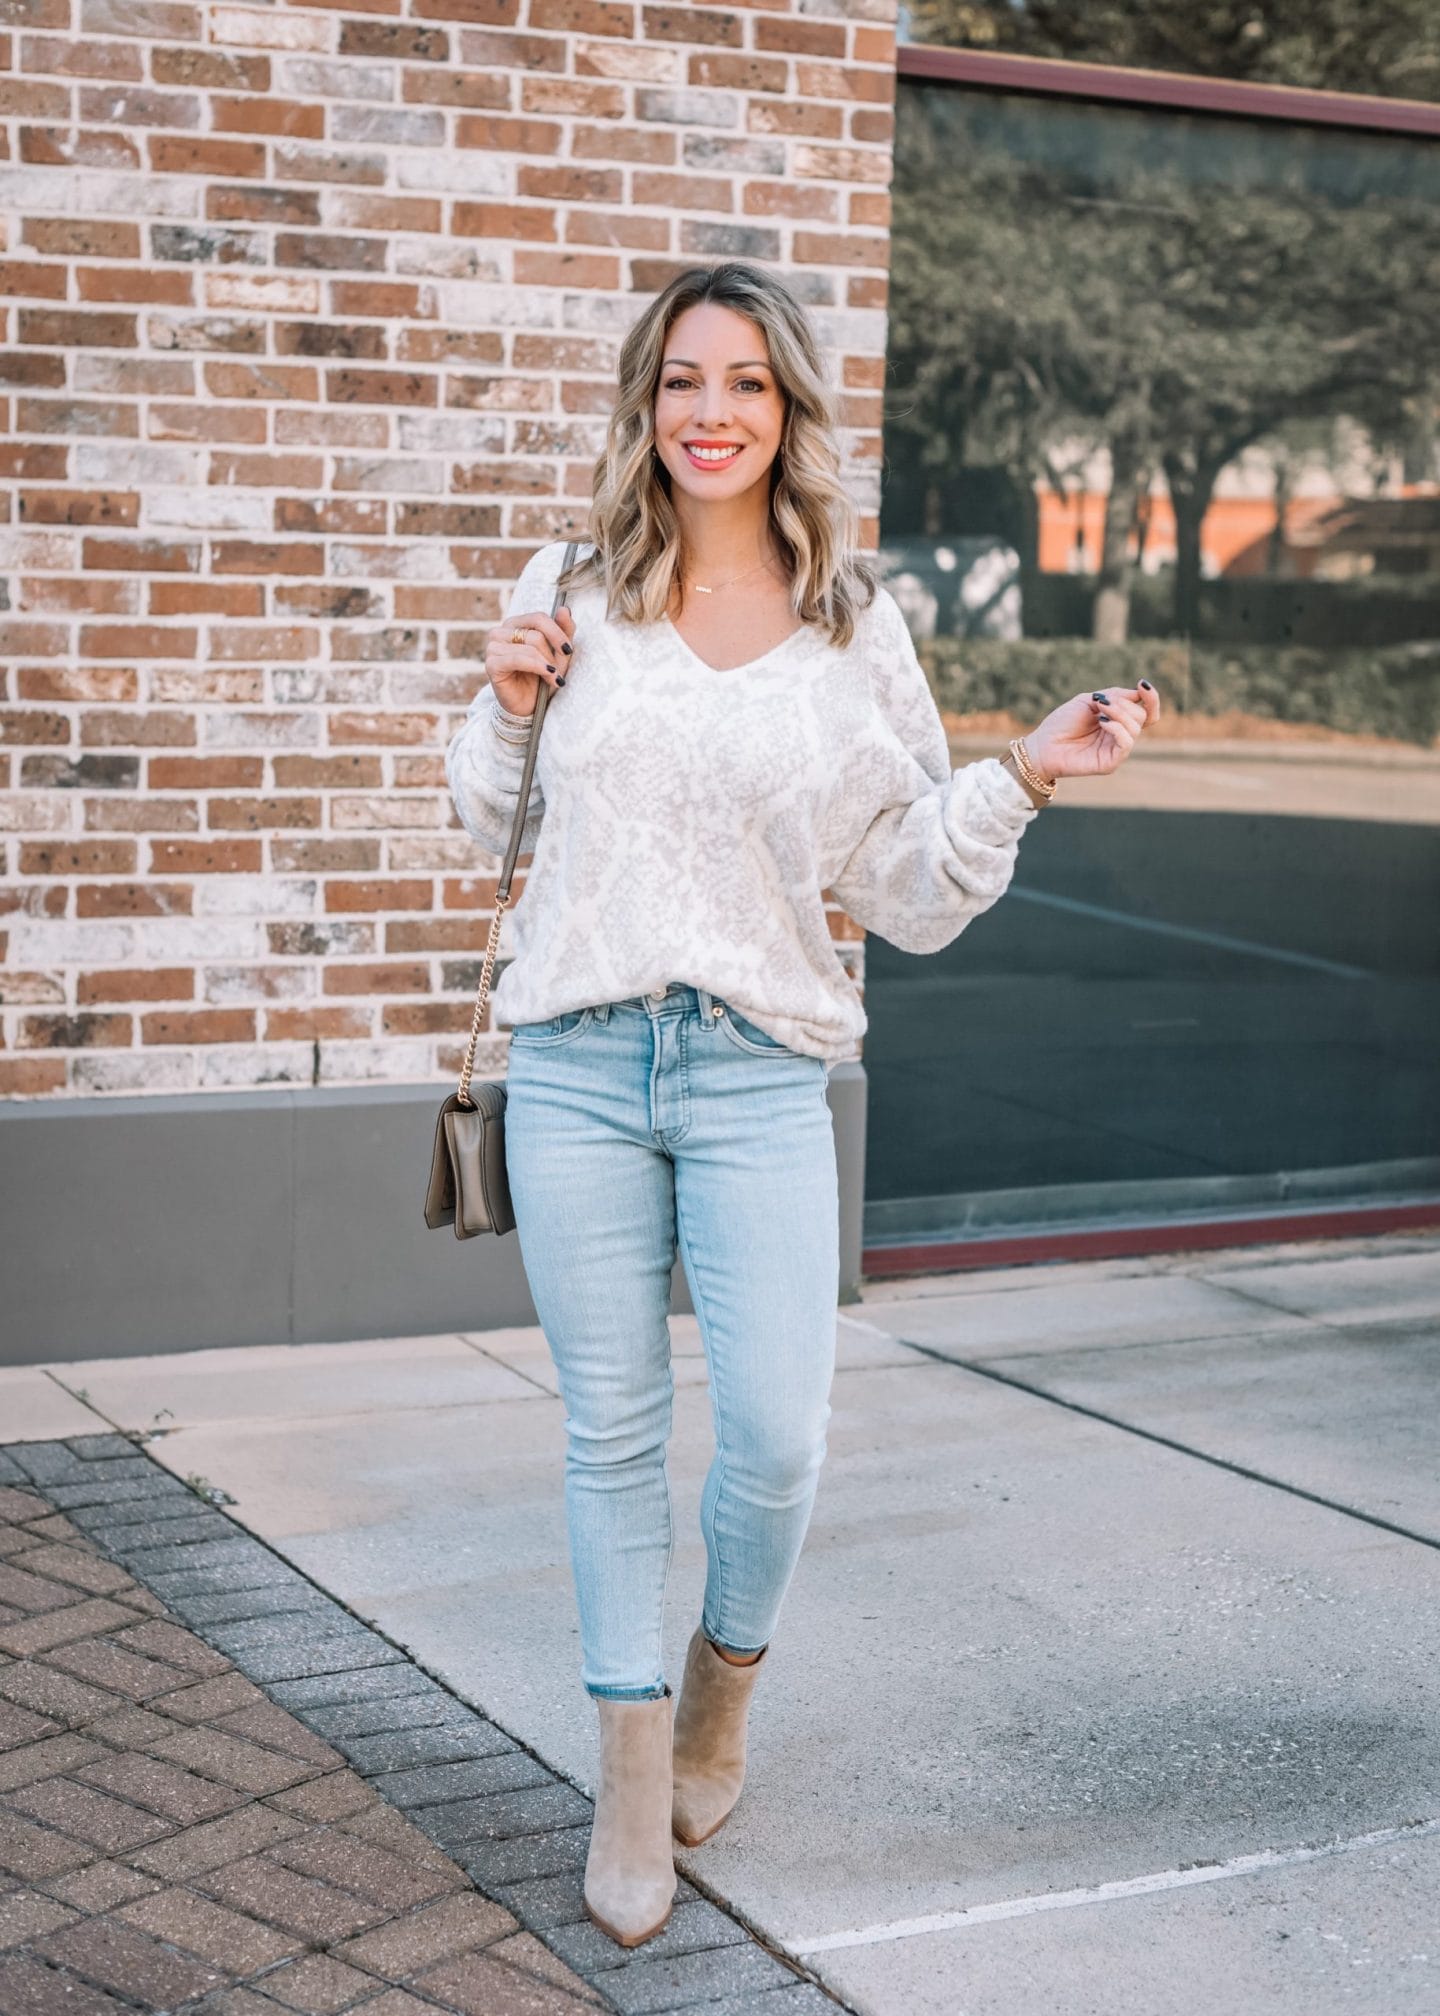 Express Fashion, Snakeskin Sweater, Jeans, Booties